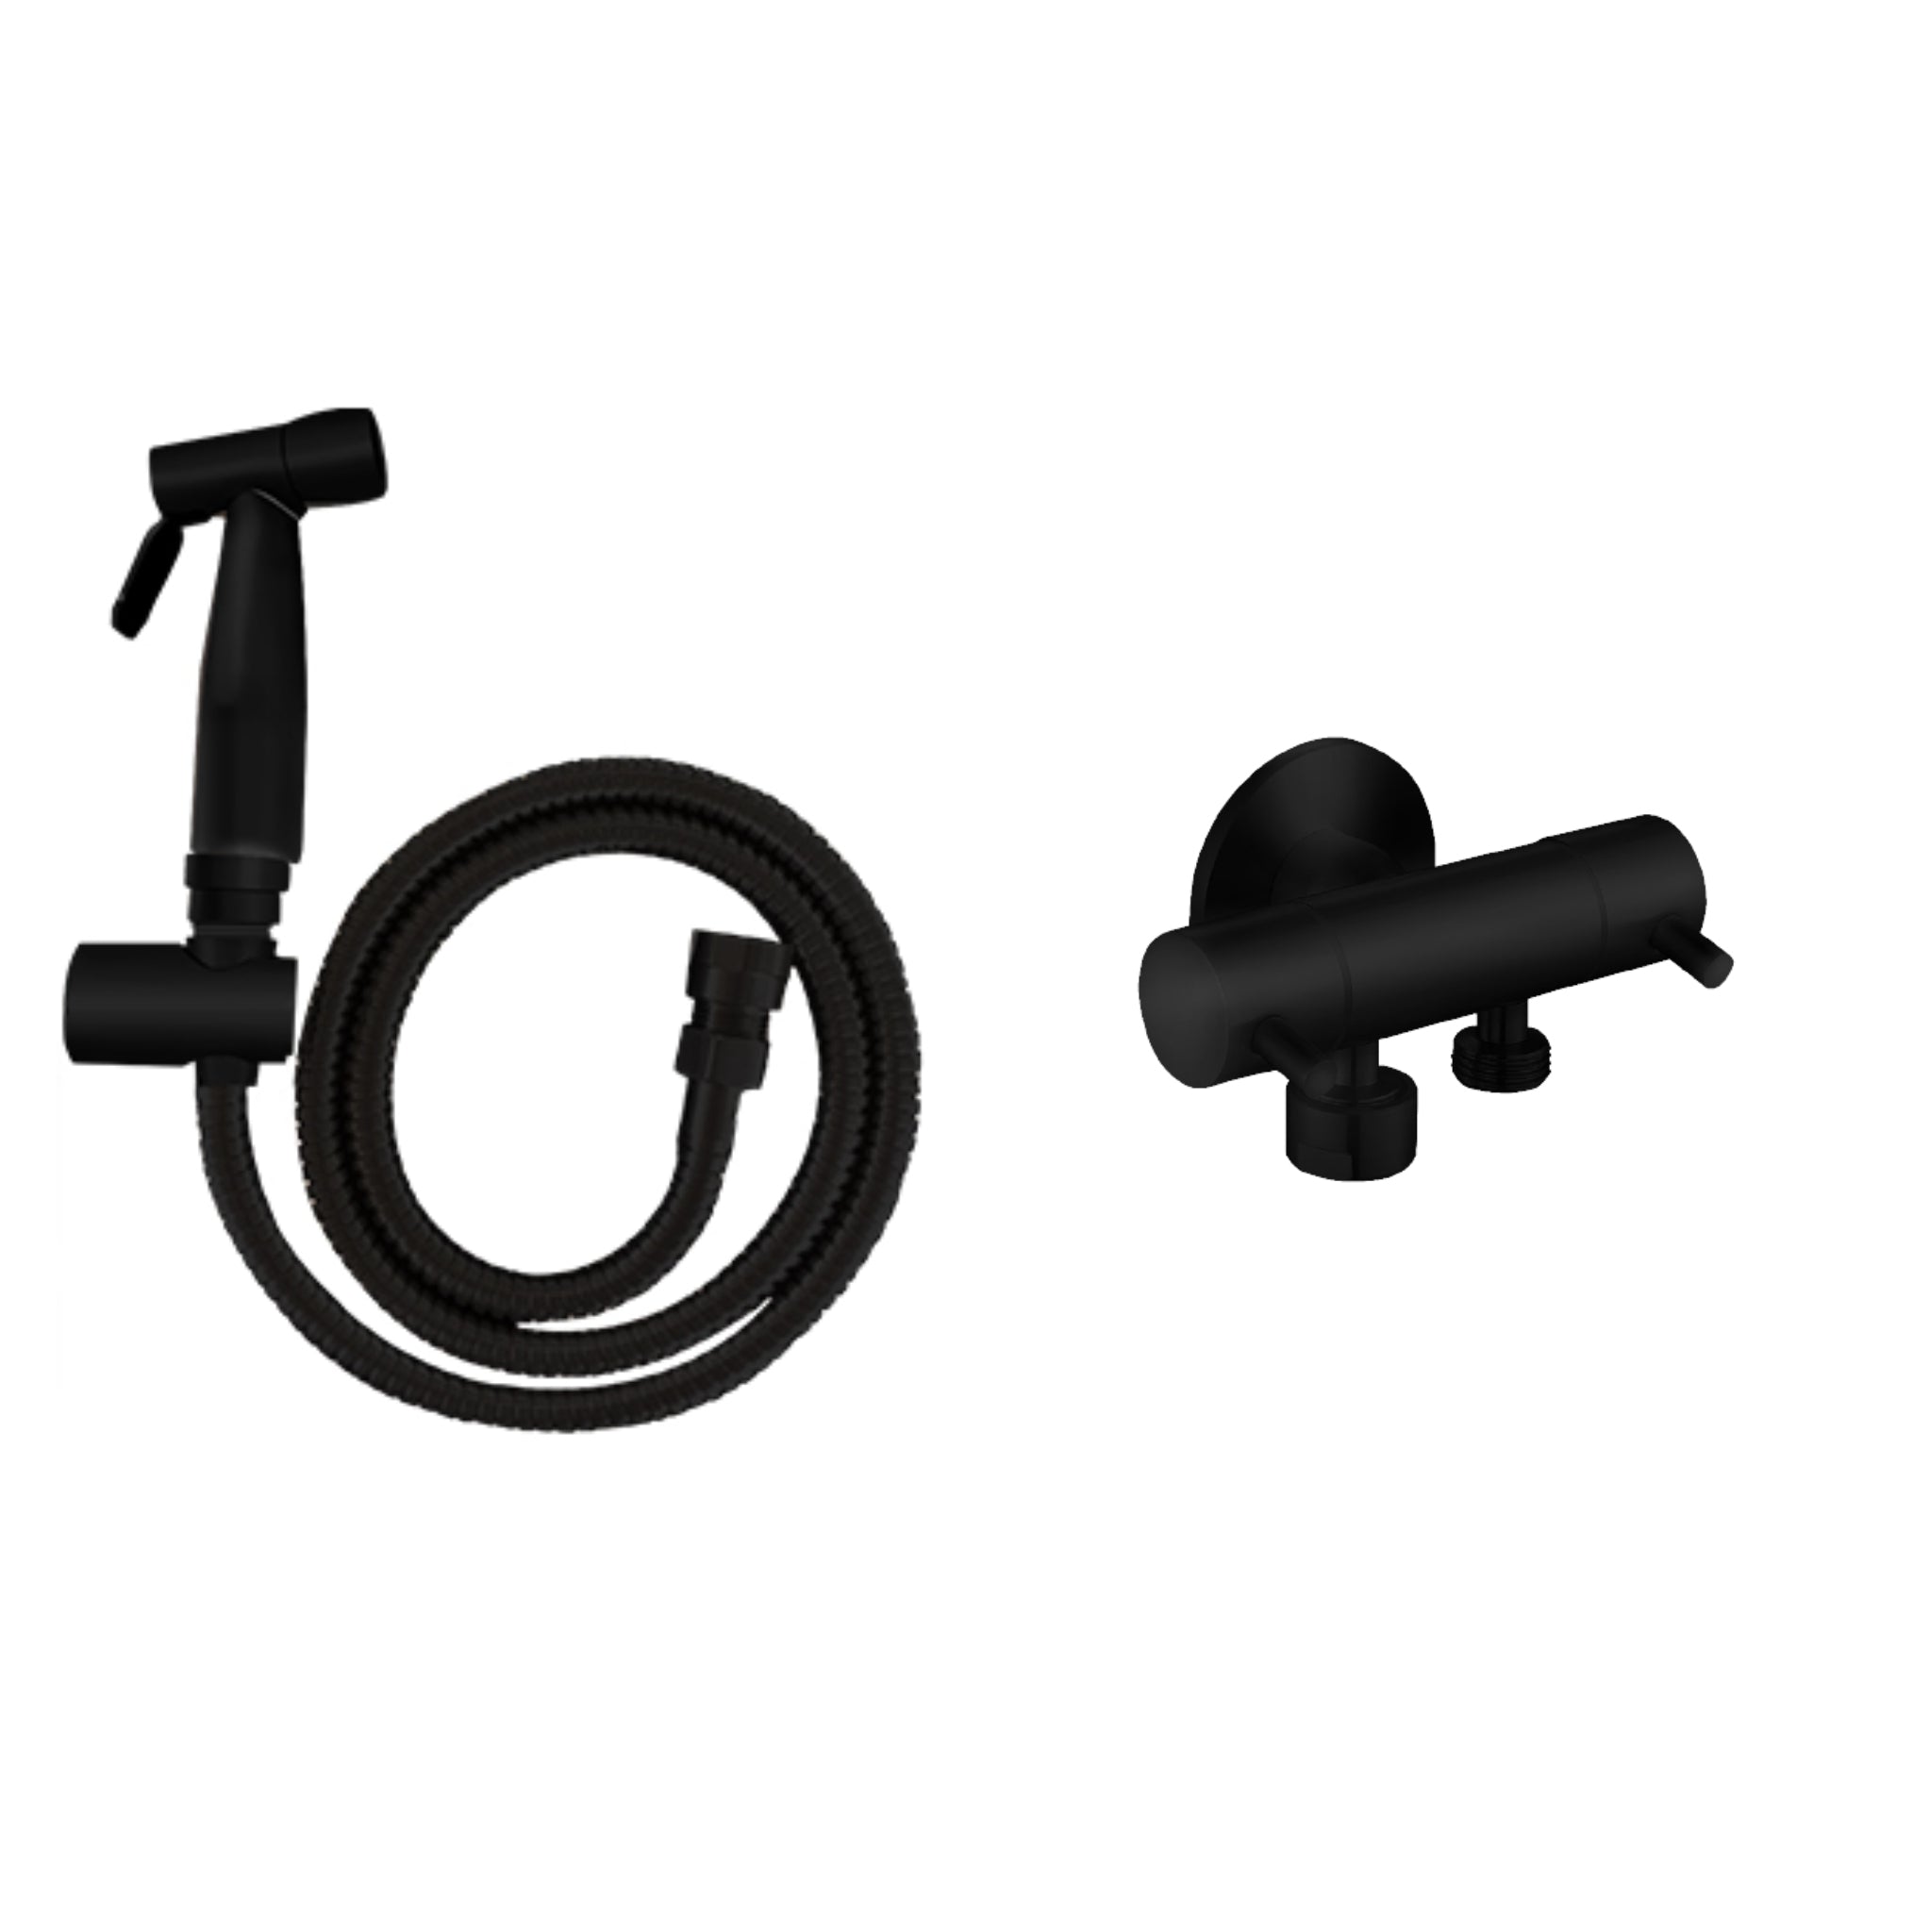 LINKWARE TRIGGER SPRAY WITH REINFORCED HOSE & DUAL MINI CISTERN COCK MATTE BLACK 1200MM